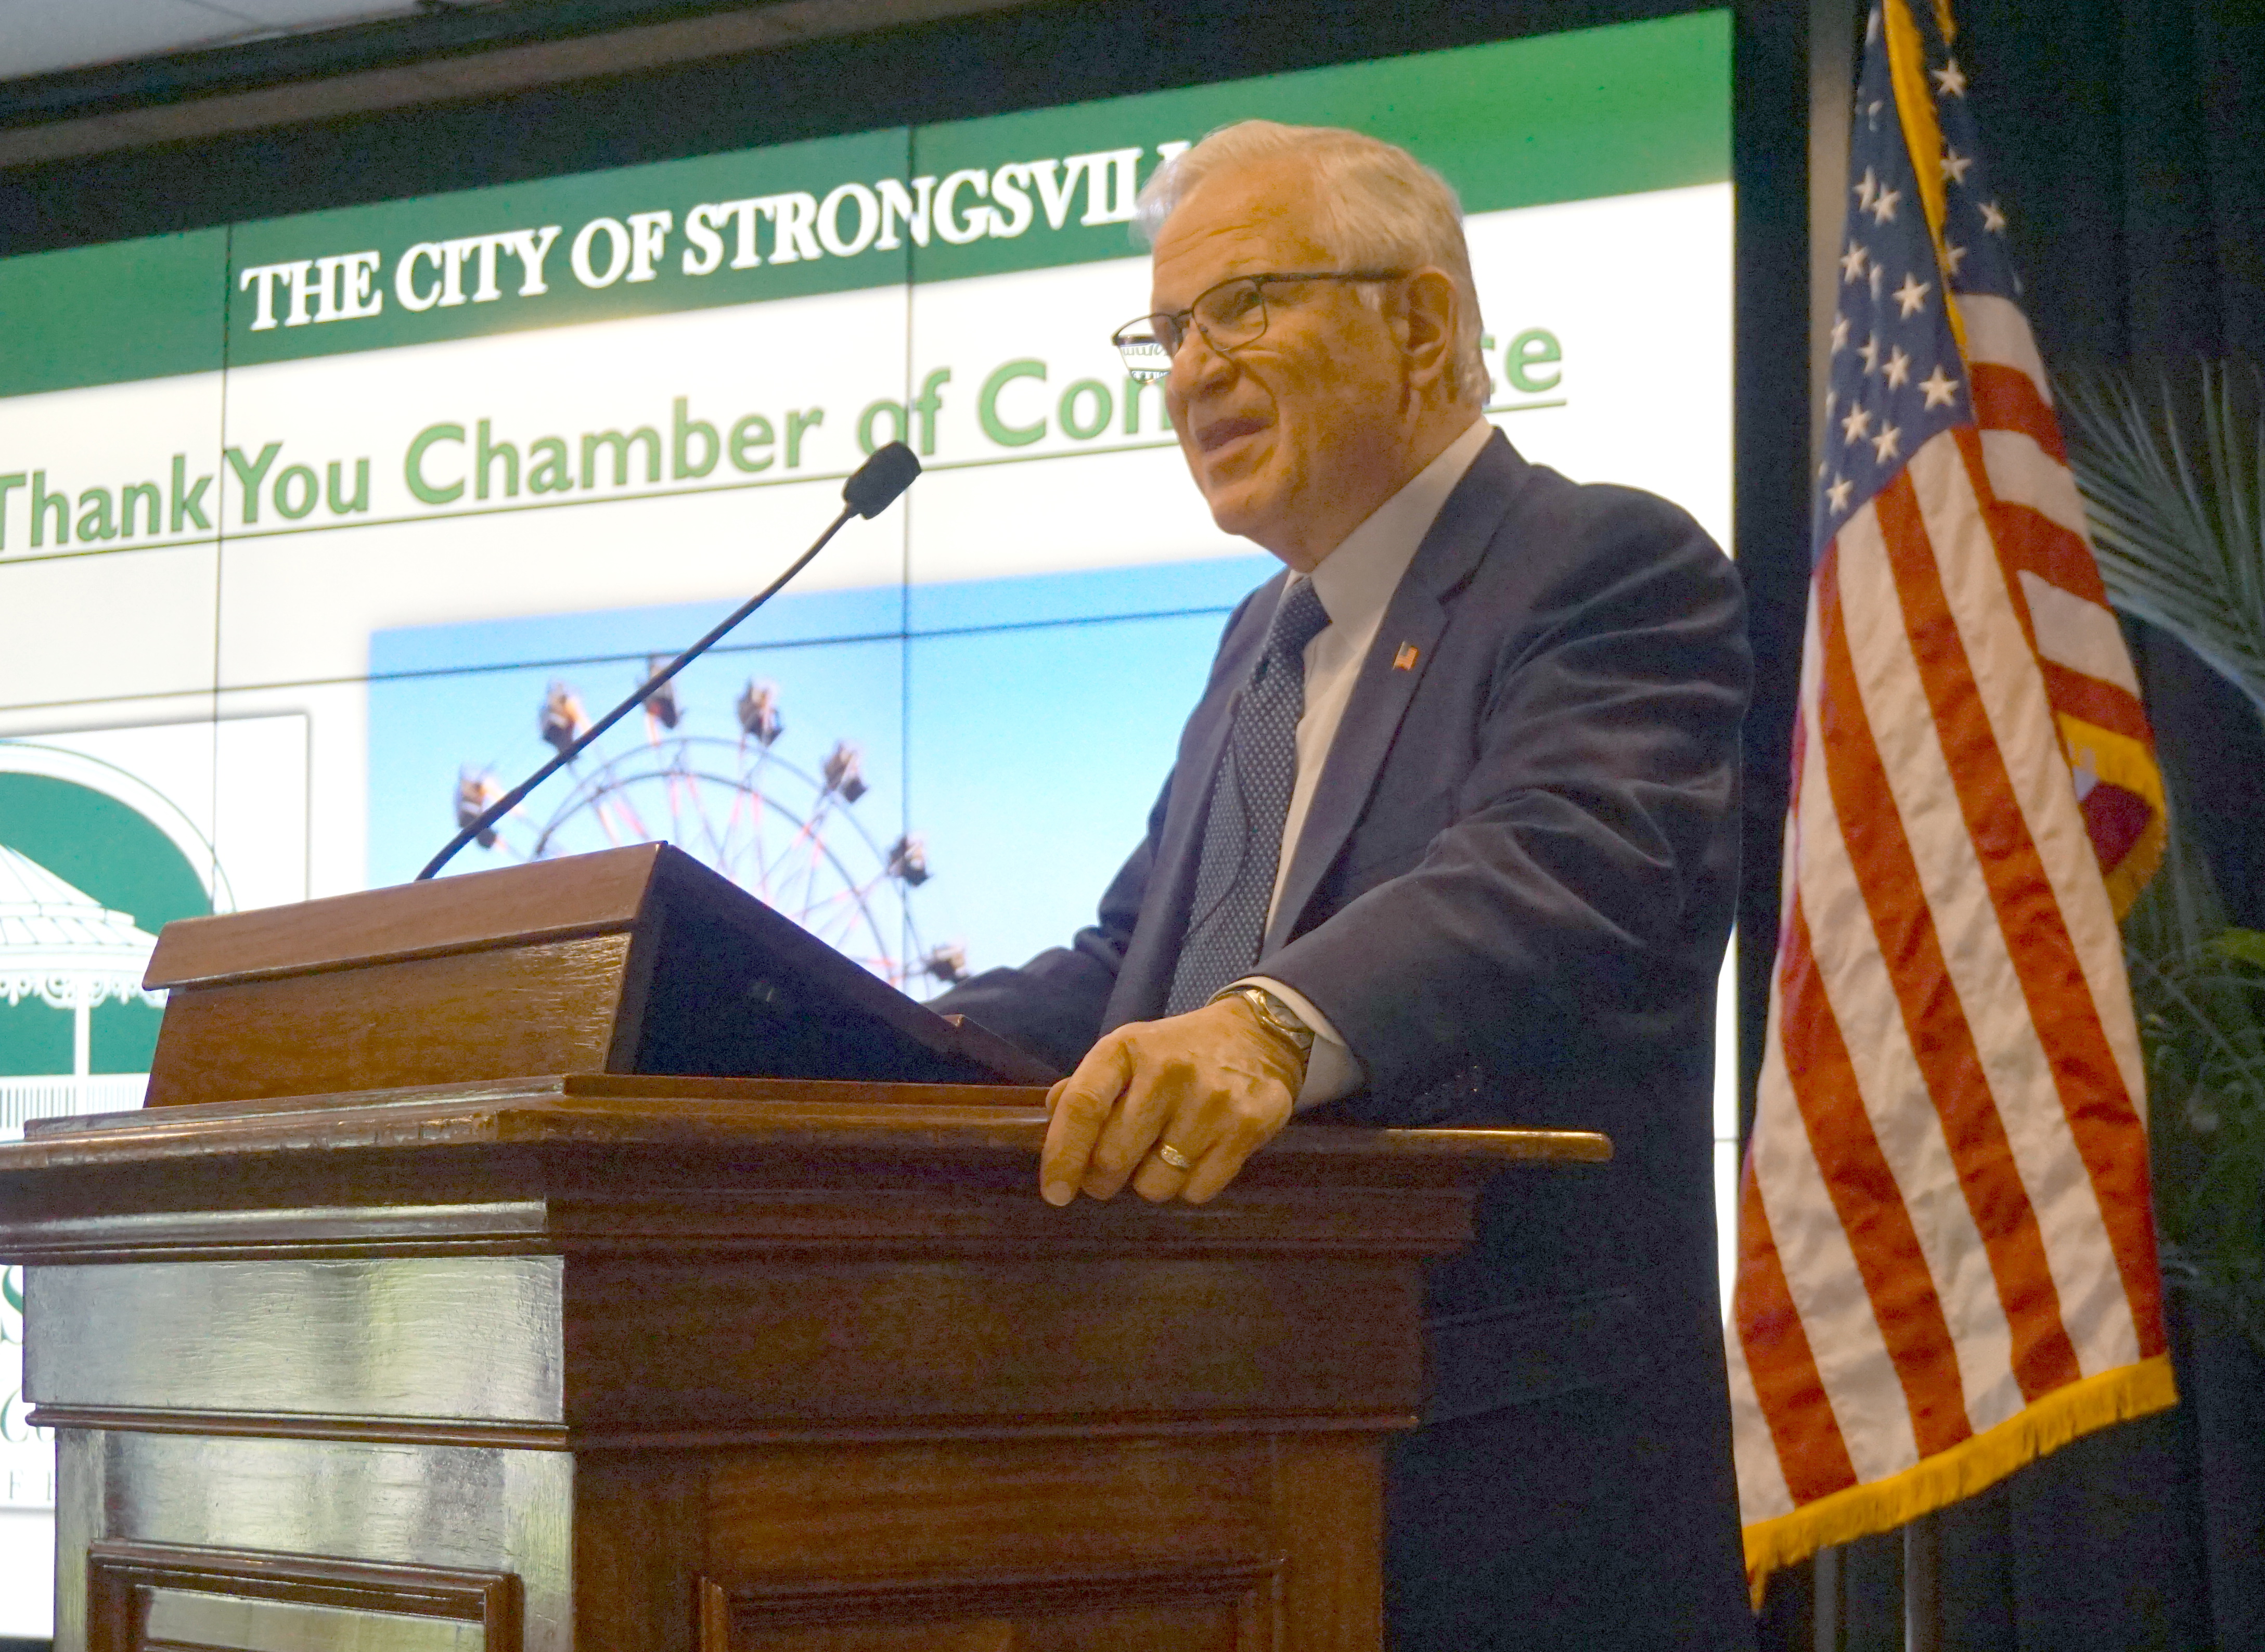 Mayor to Deliver State of the City Address